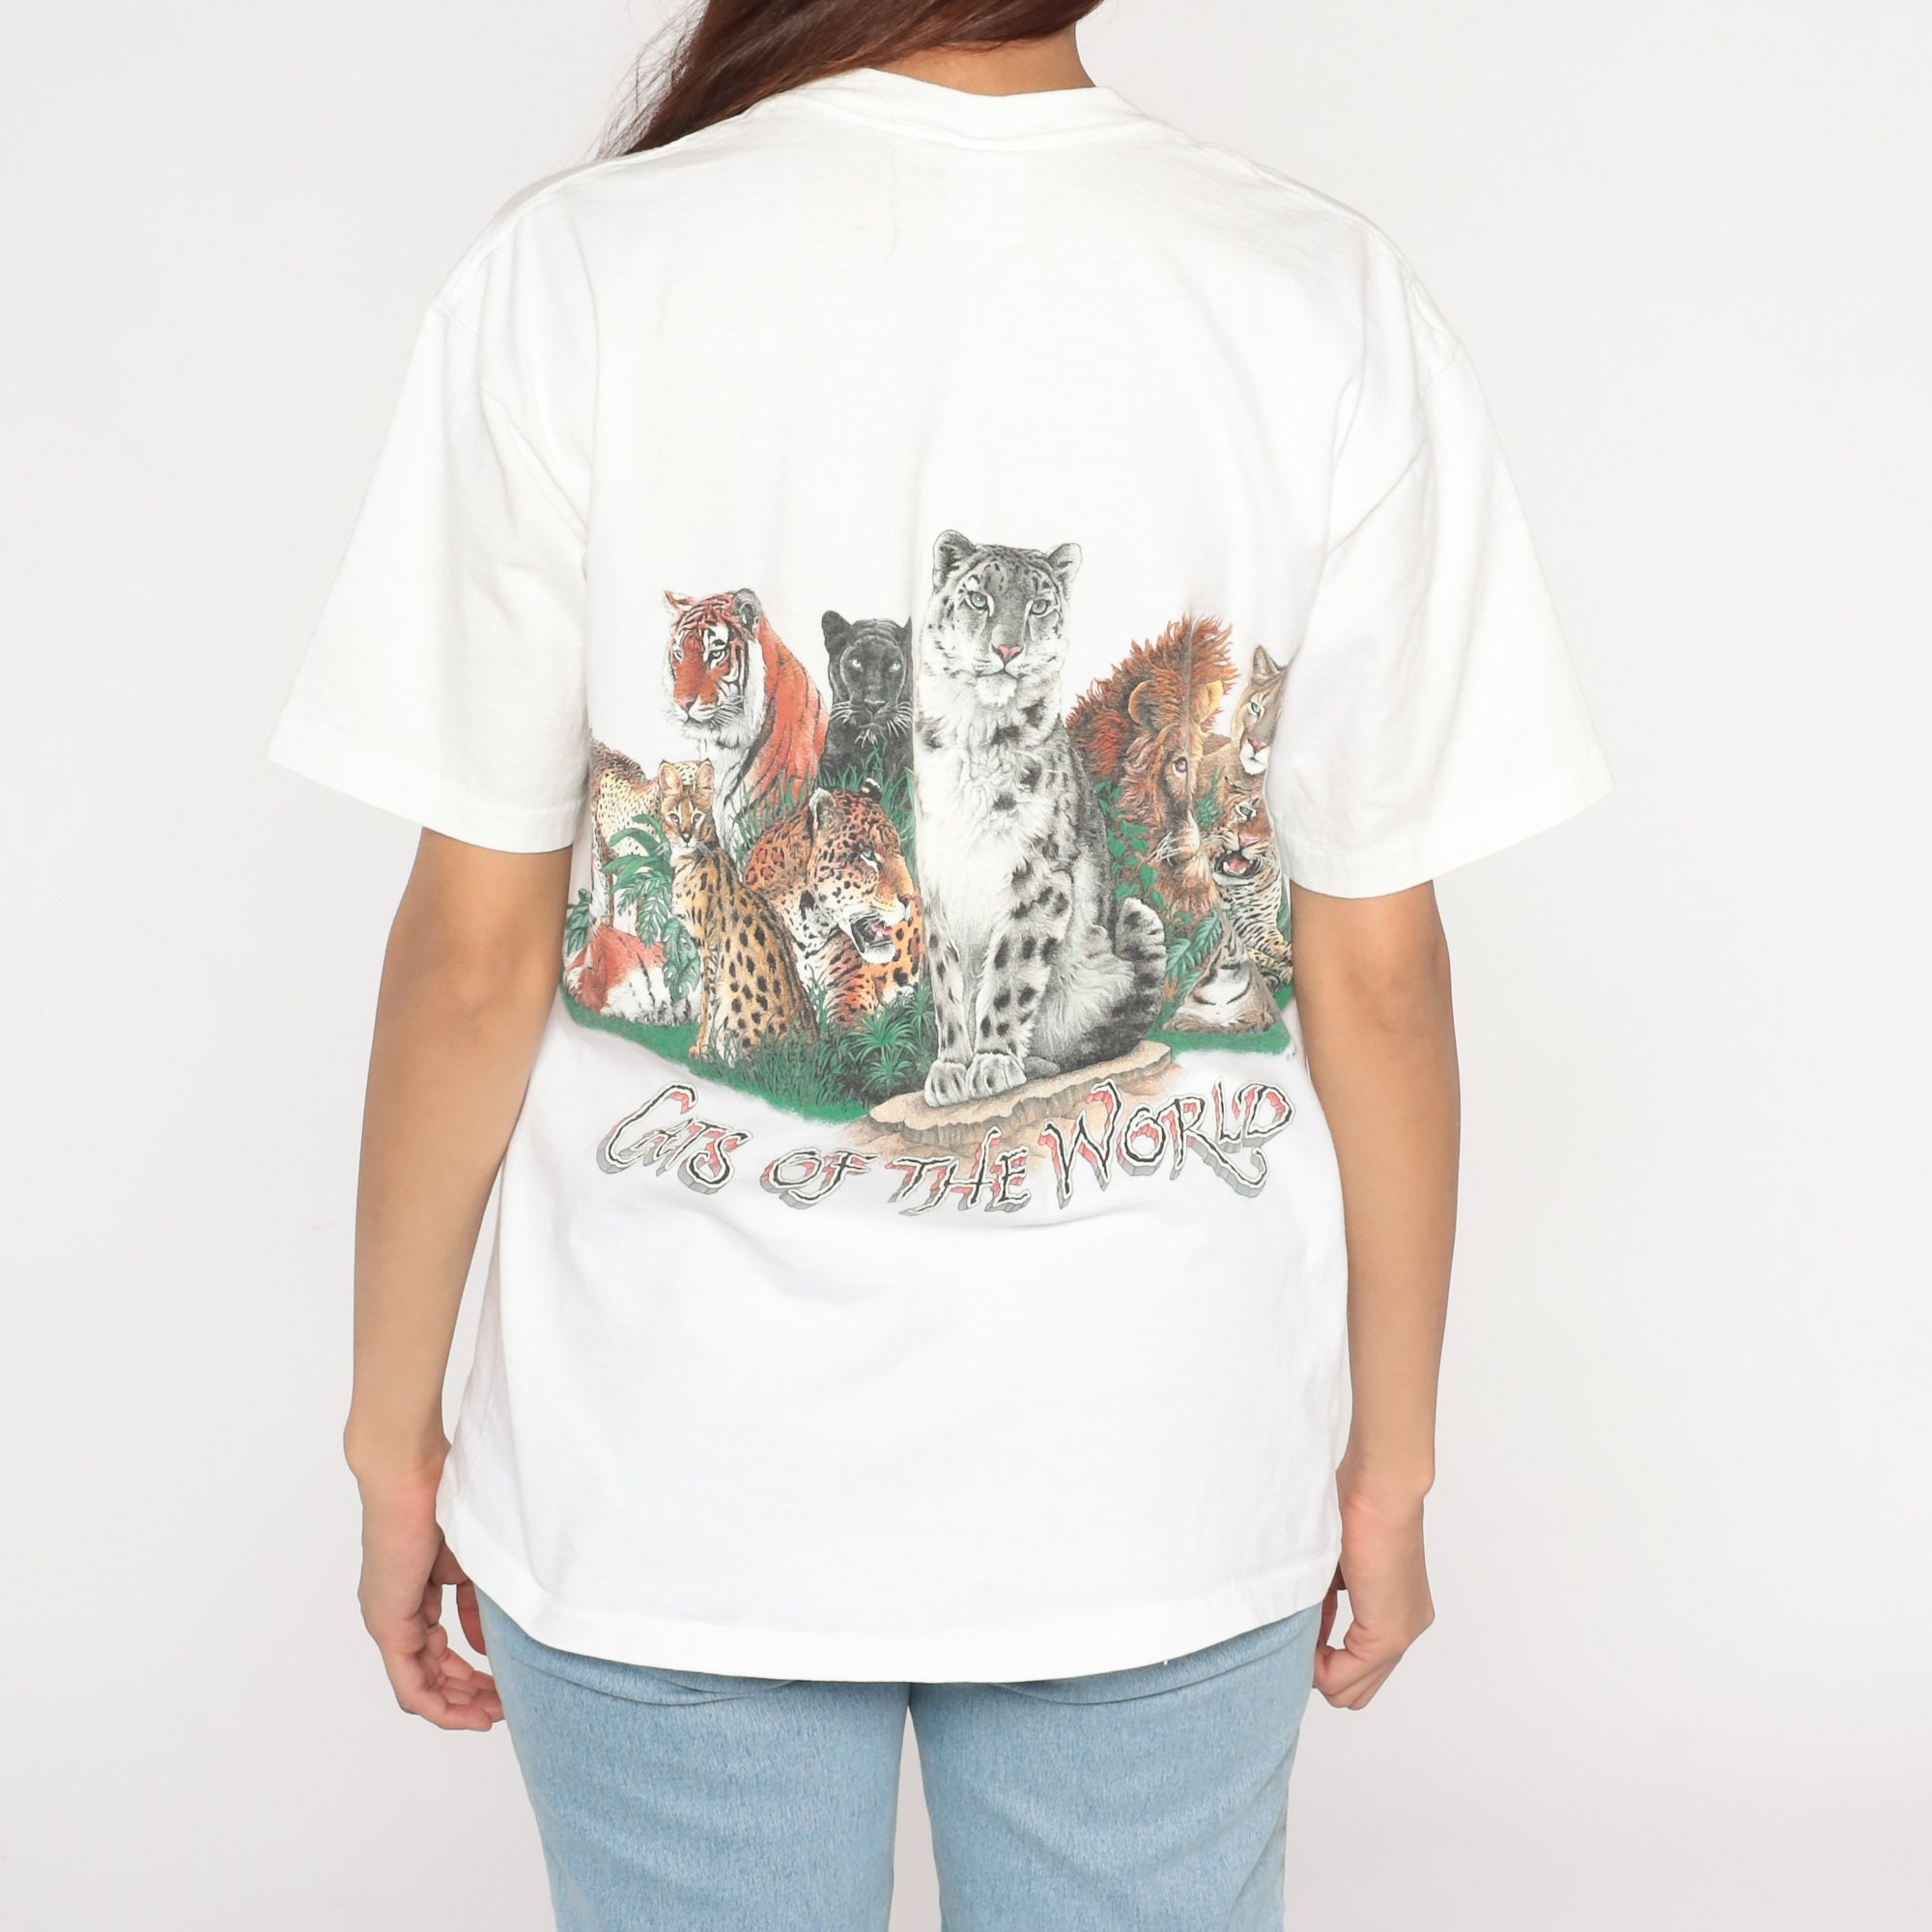 Big Cats Shirt 90s Cats of the World Tshirt Lion Tiger Snow Leopard ...